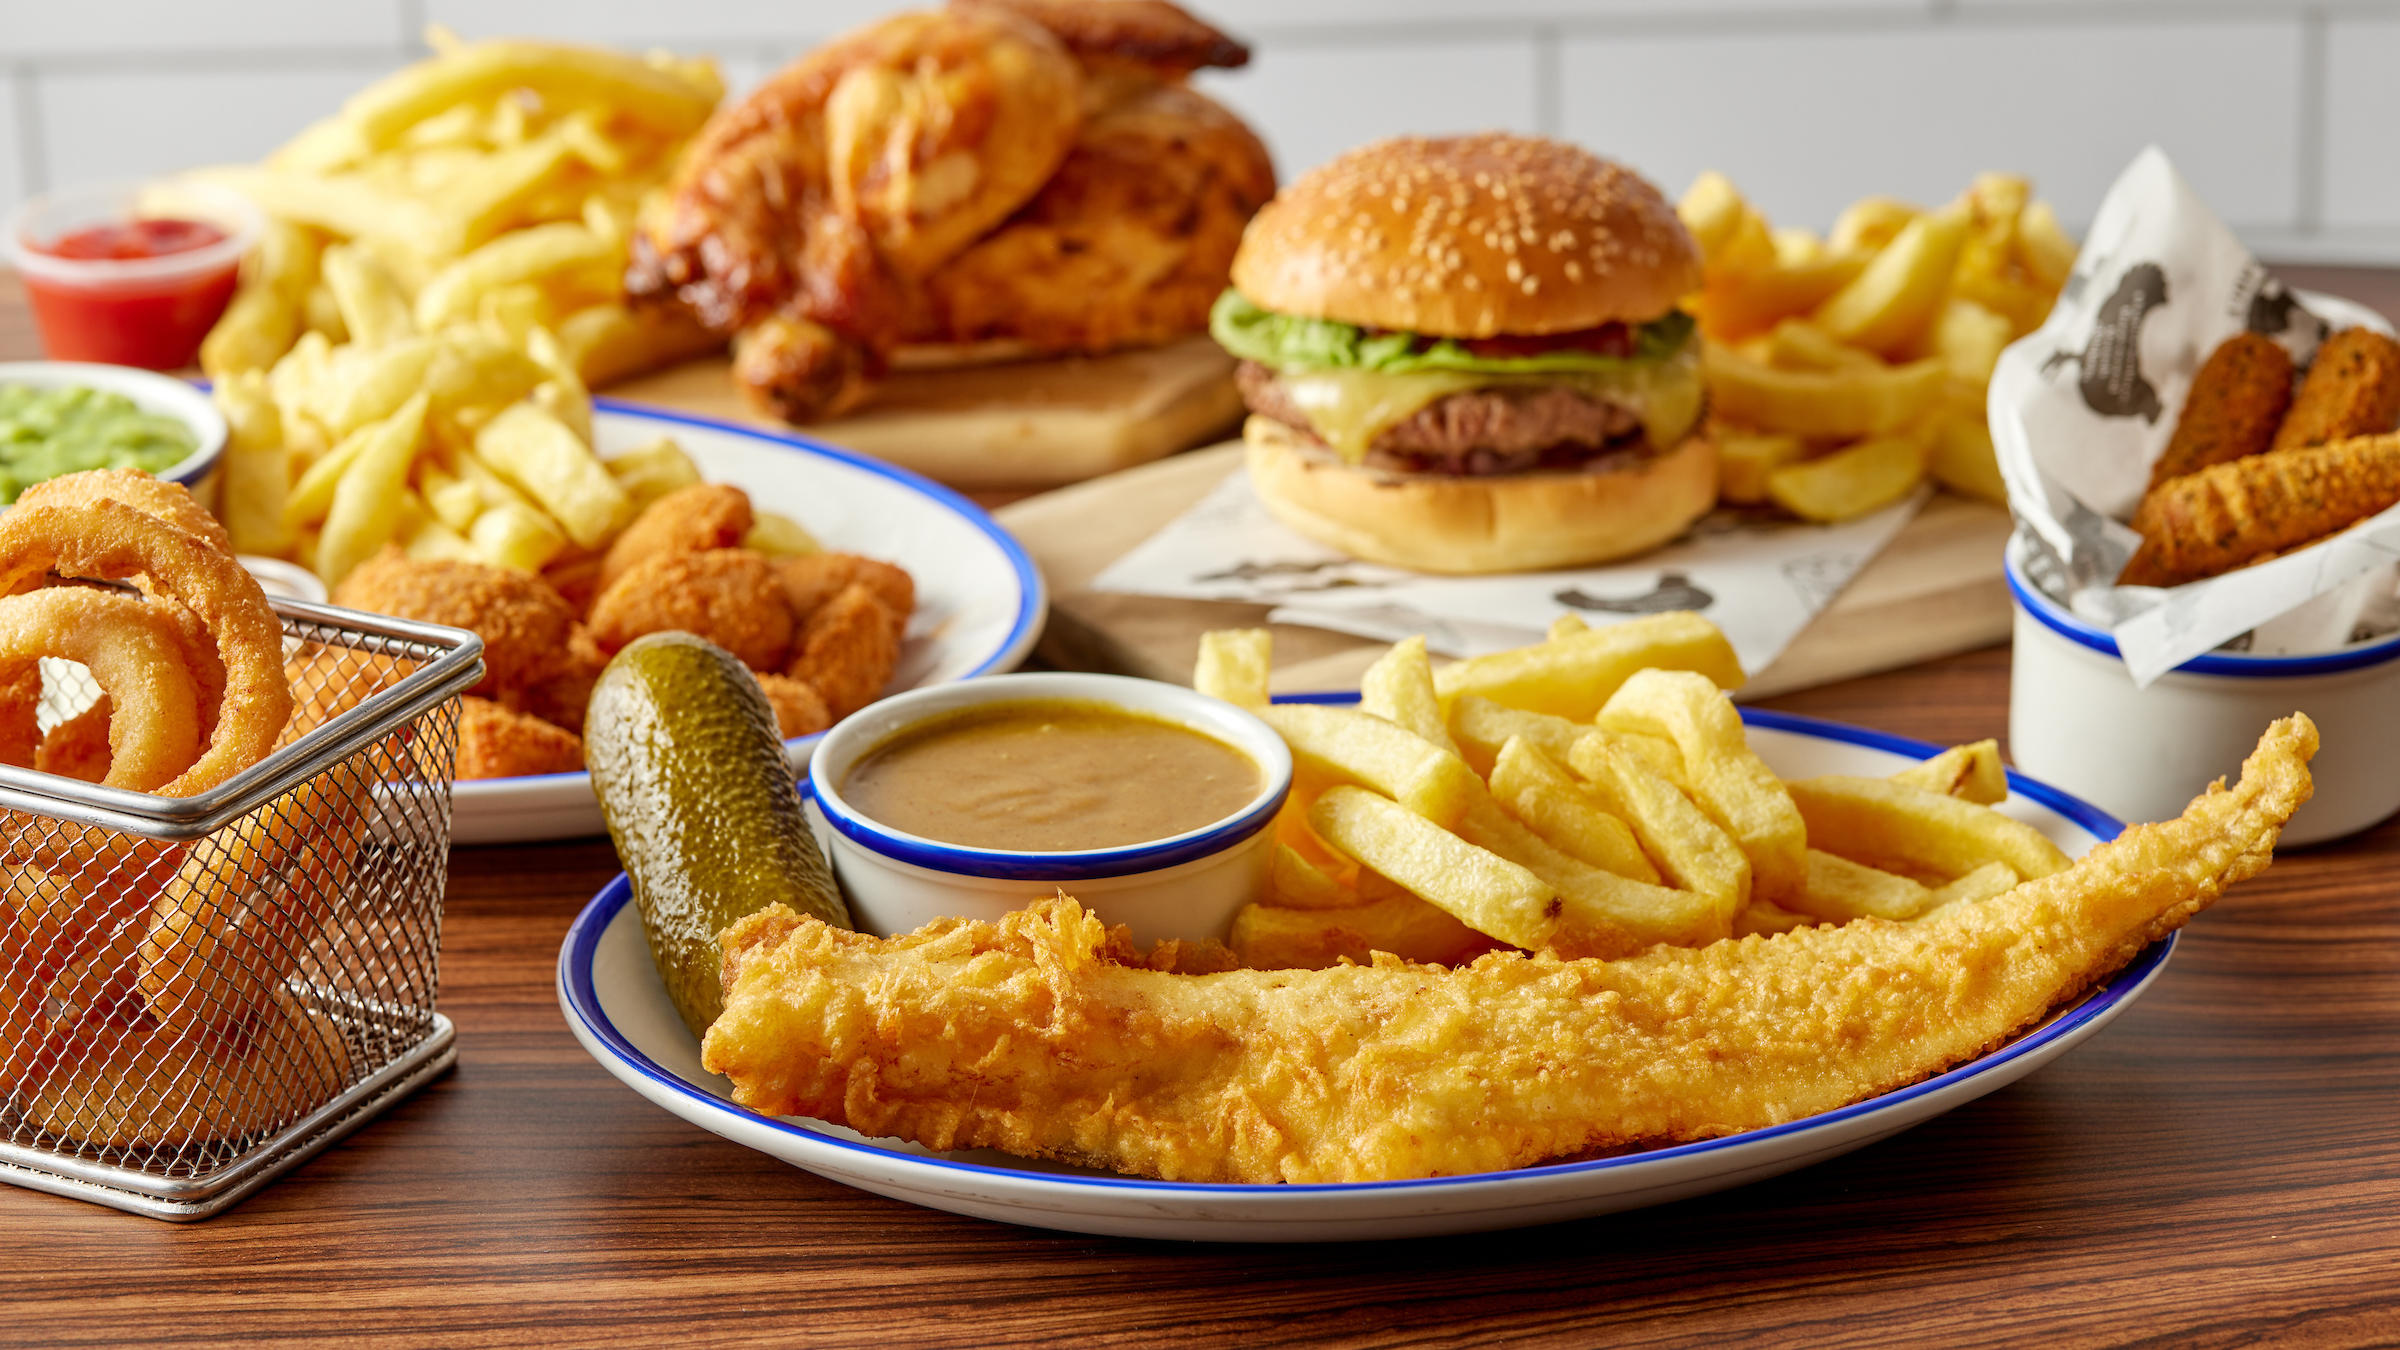 Enjoy Churchills fish and chips your way! Order click & collect through our simple online ordering w Churchill's Fish & Chips Melbourne, Chelmsford Chelmsford 01245 355688